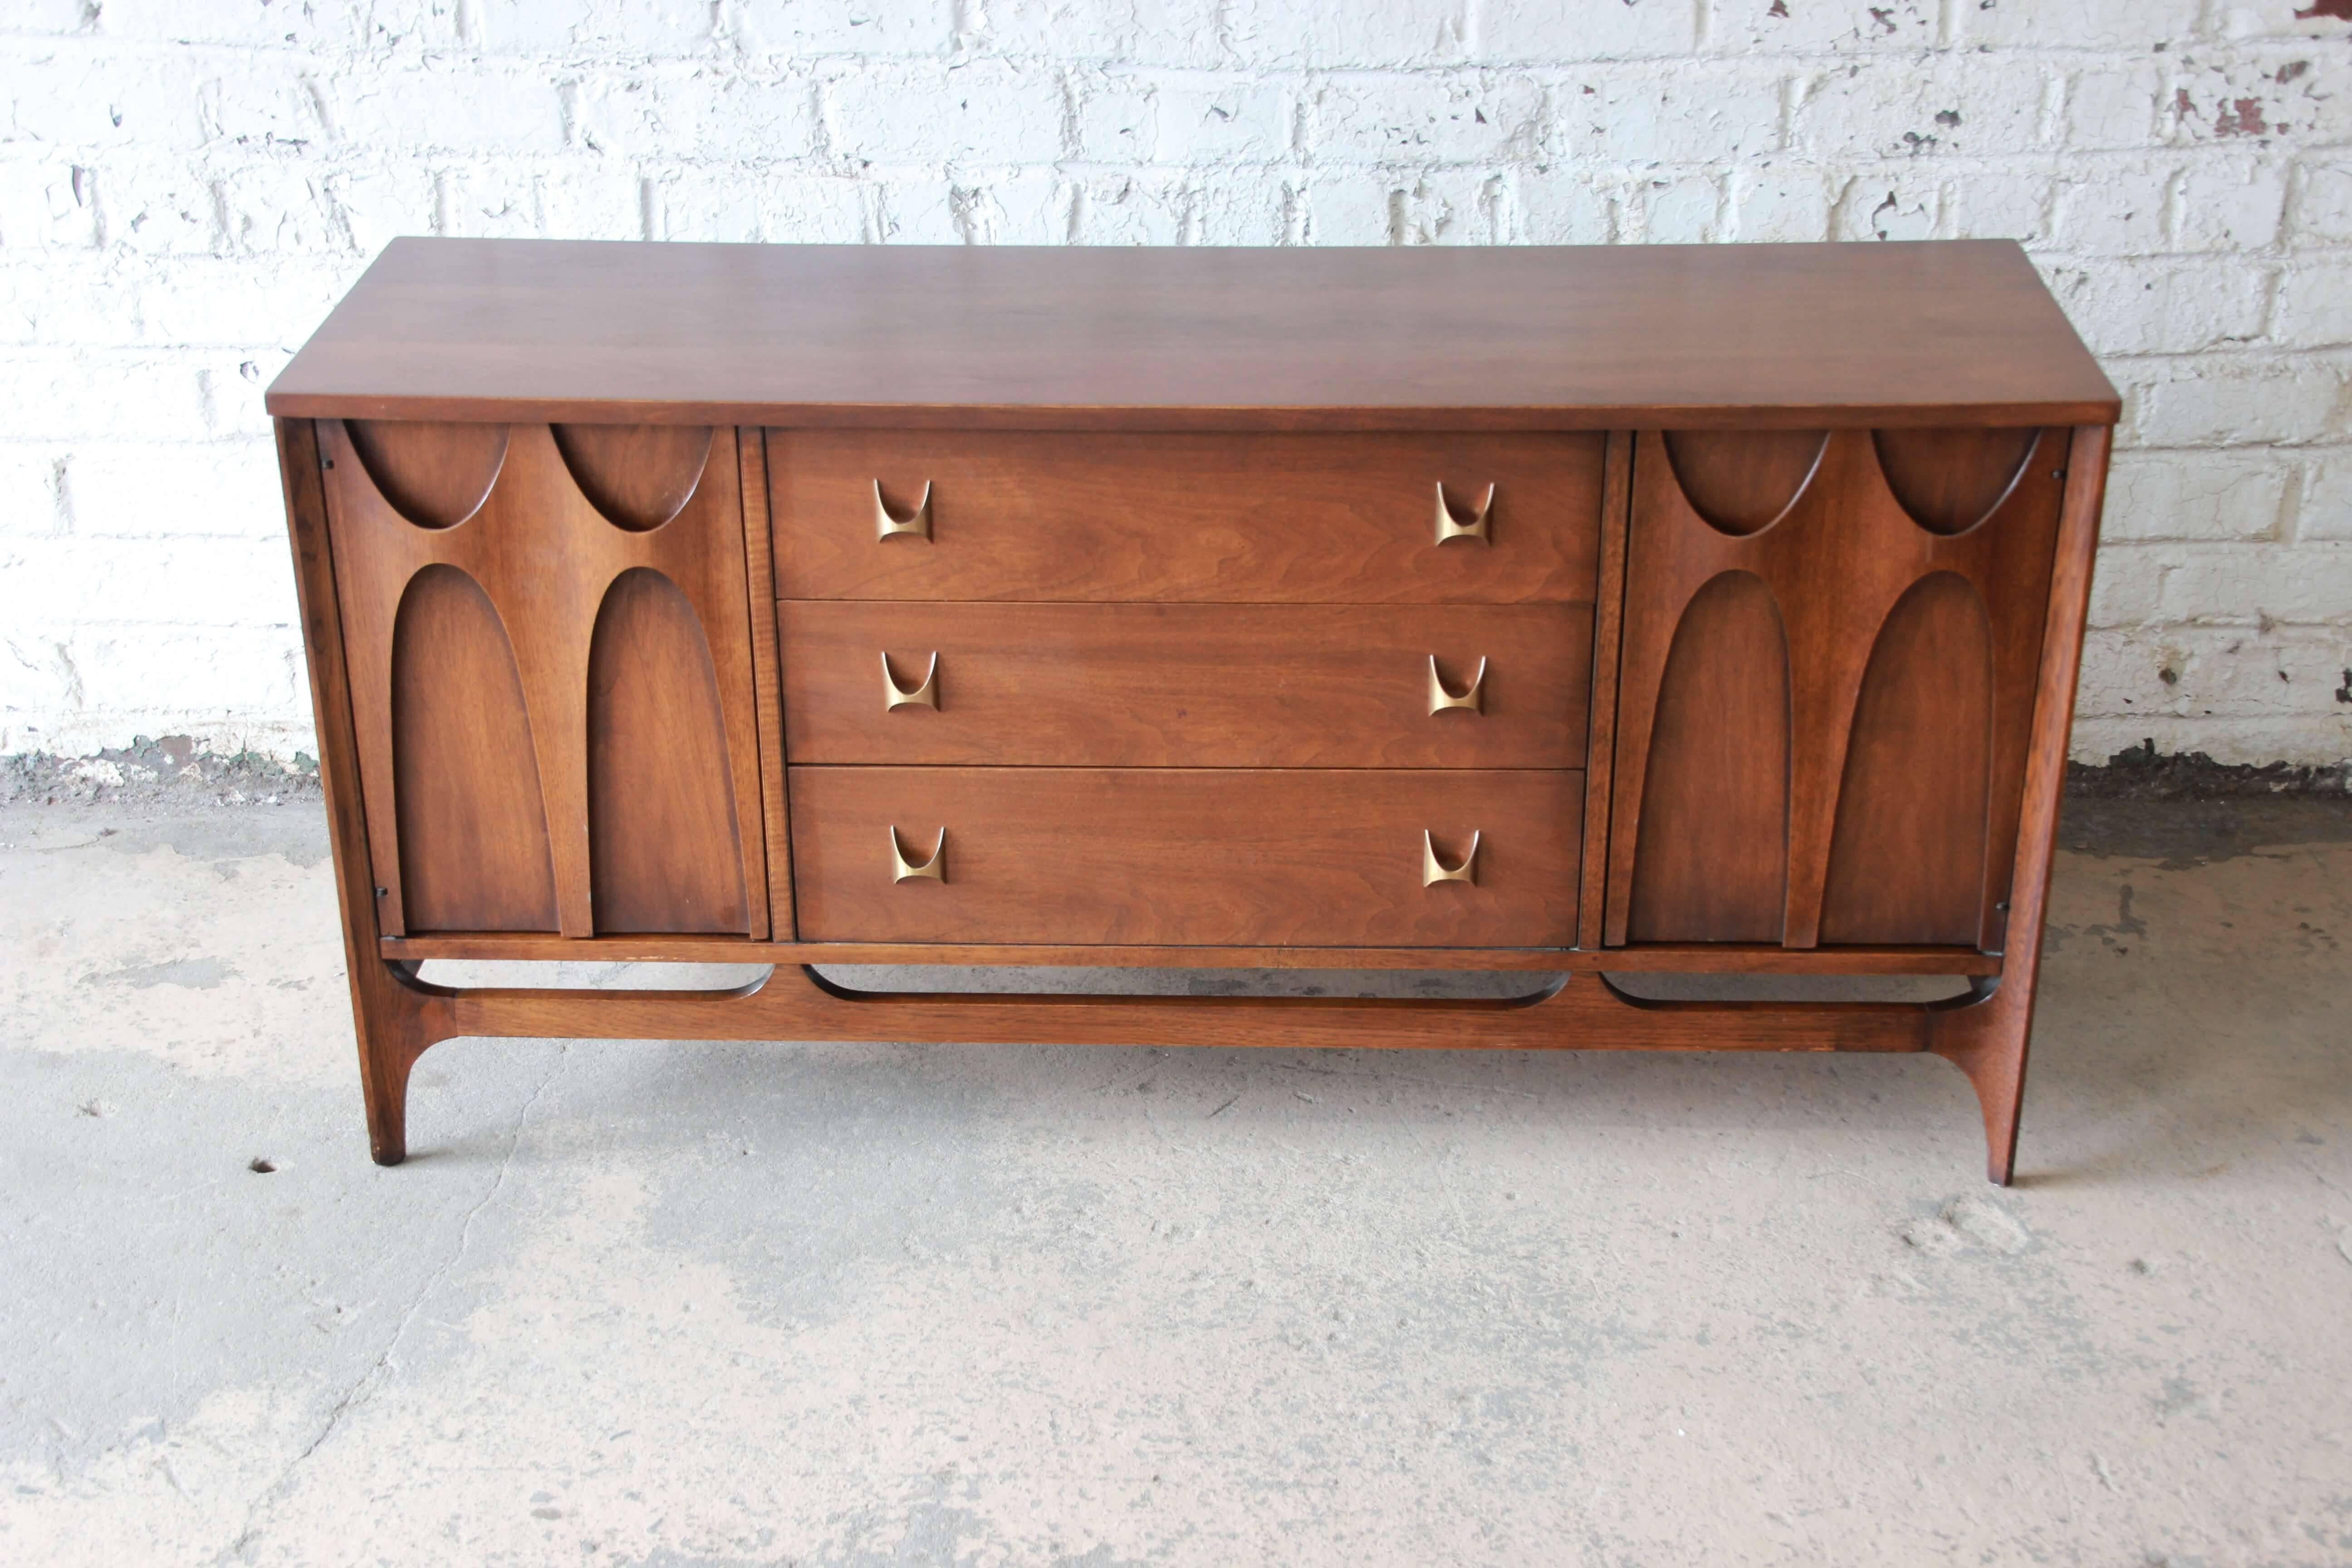 Offering a very nice and iconic Mid-Century Modern Broyhill Brasilia sideboard credenza. The credenza has sculpted walnut pulls on the two outside cabinets that open up to a shelf for storage. The centre offer three drawers for additional storage.